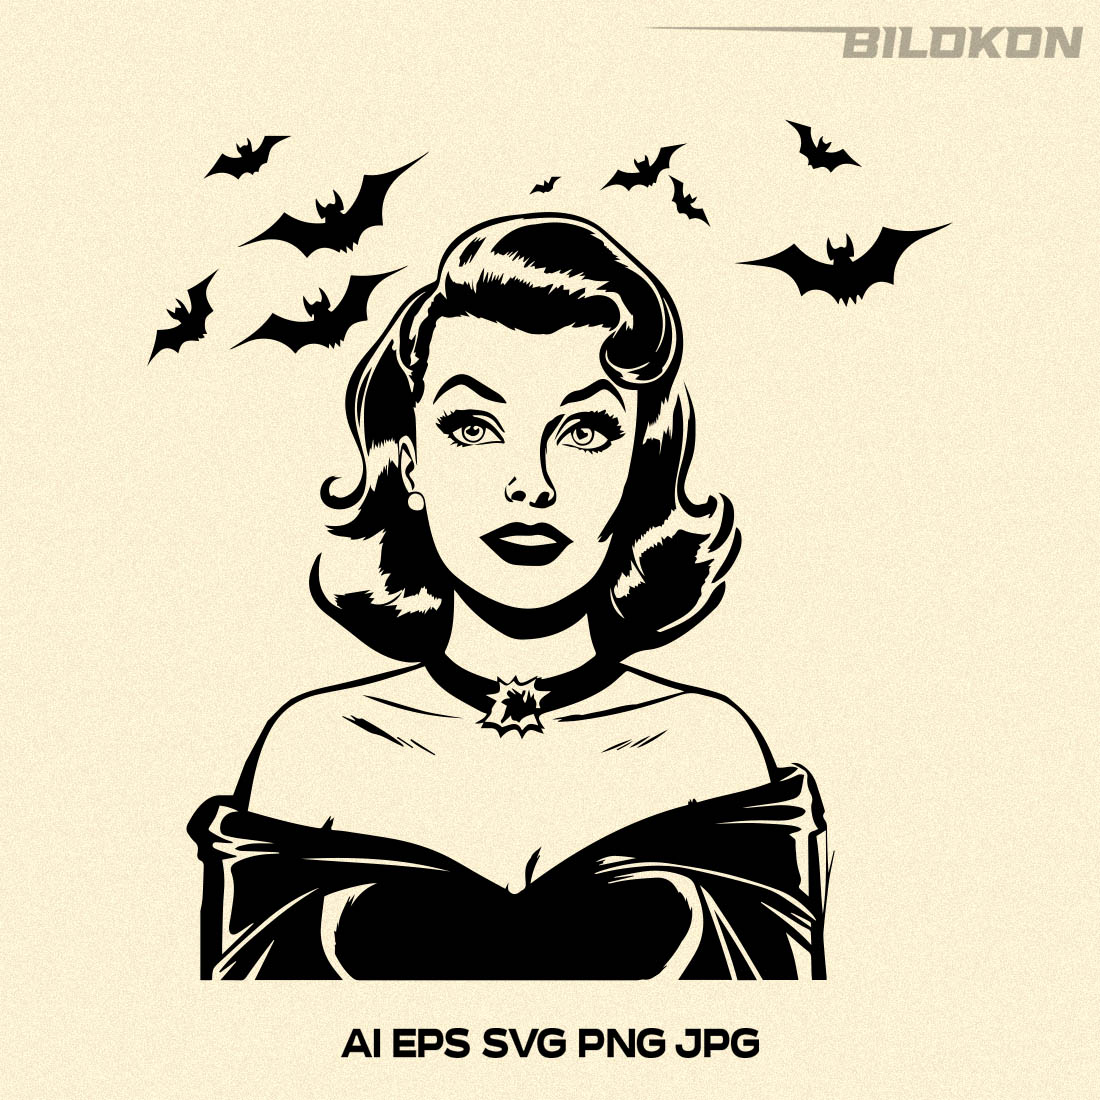 Halloween illustration woman and flying bats them, SVG preview image.